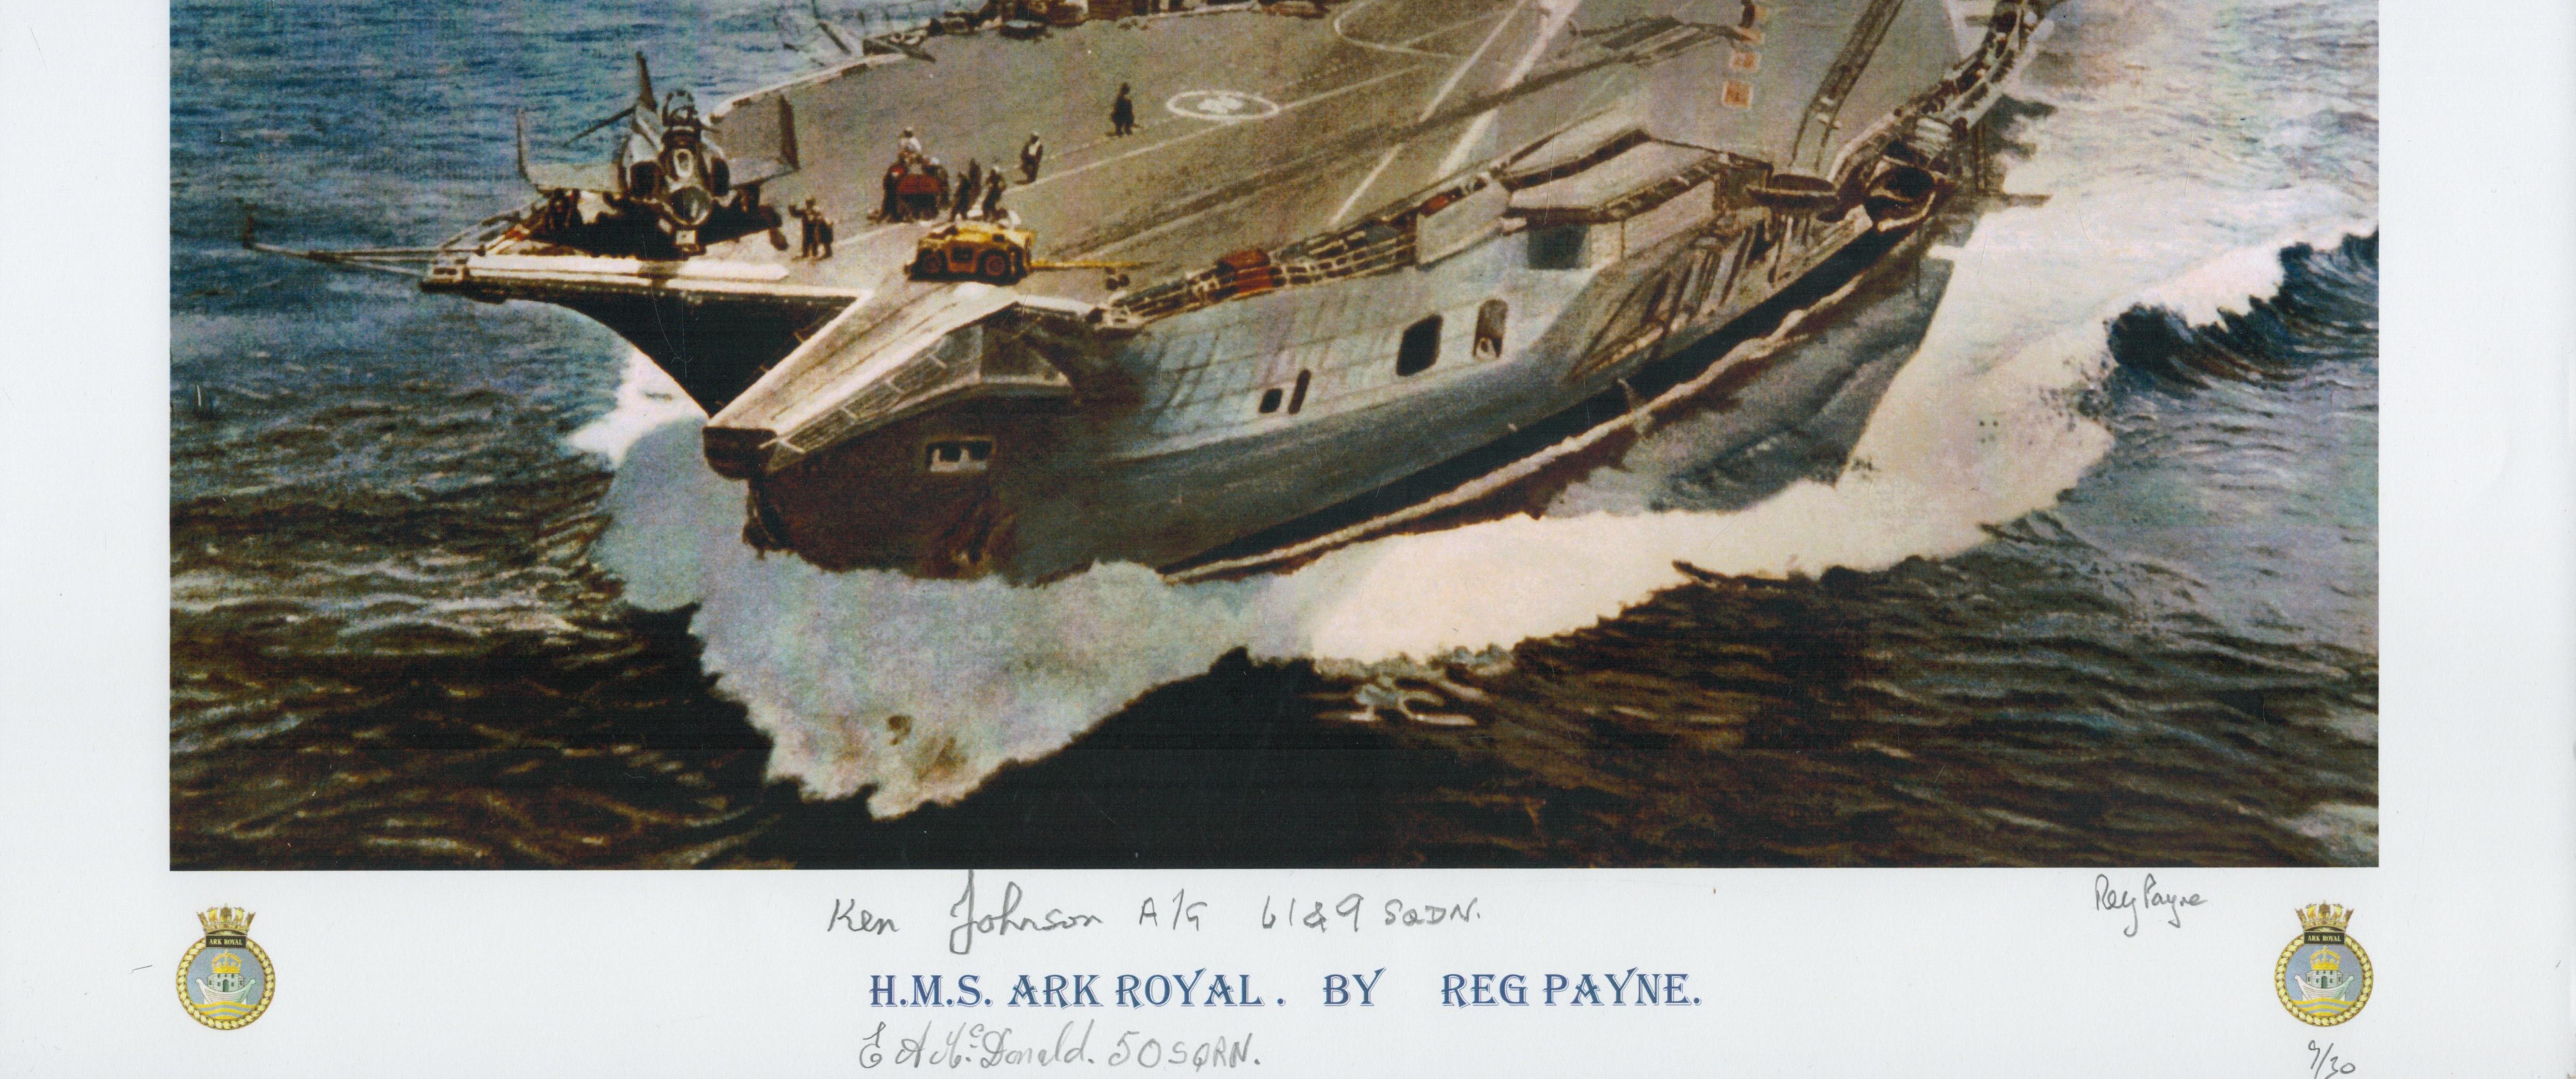 H.M.S. Ark Royal print by Reg Payne signed by Johnson and Mcdonald. Numbered 9 of 30. Reg Payne - Image 2 of 2